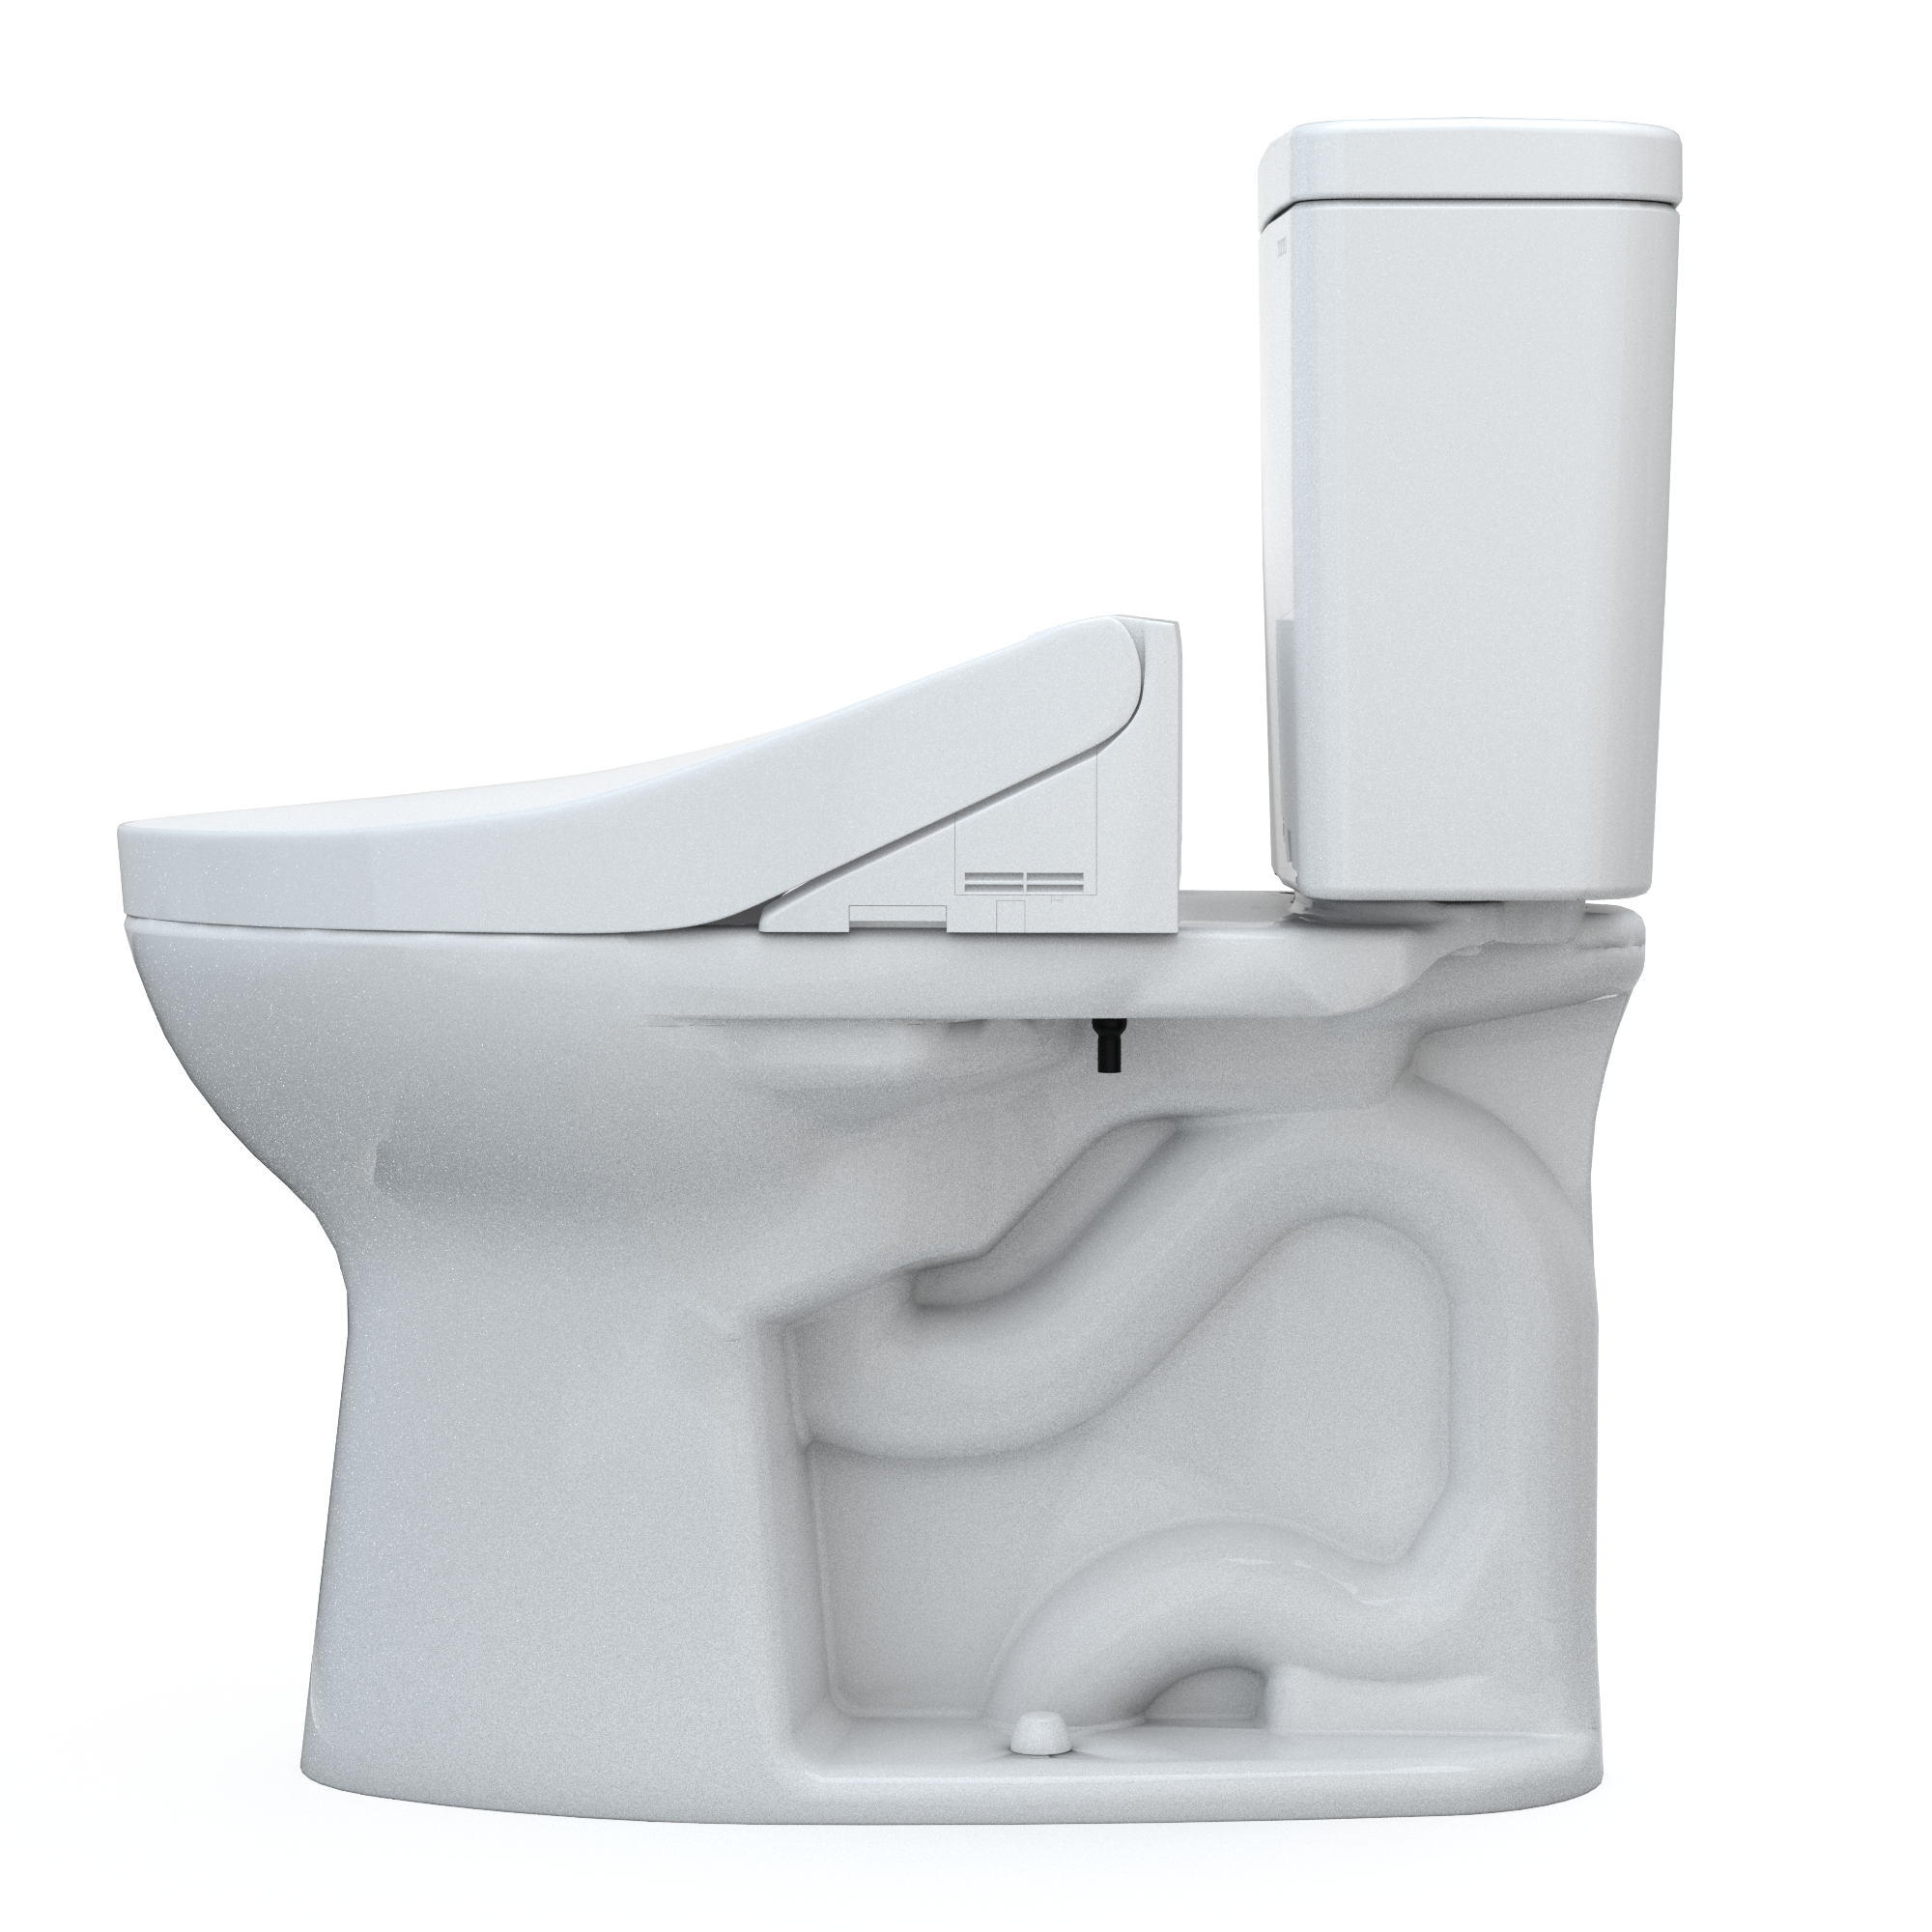 Toto Drake Cotton Elongated Standard Height 2 Piece Soft Close Toilet